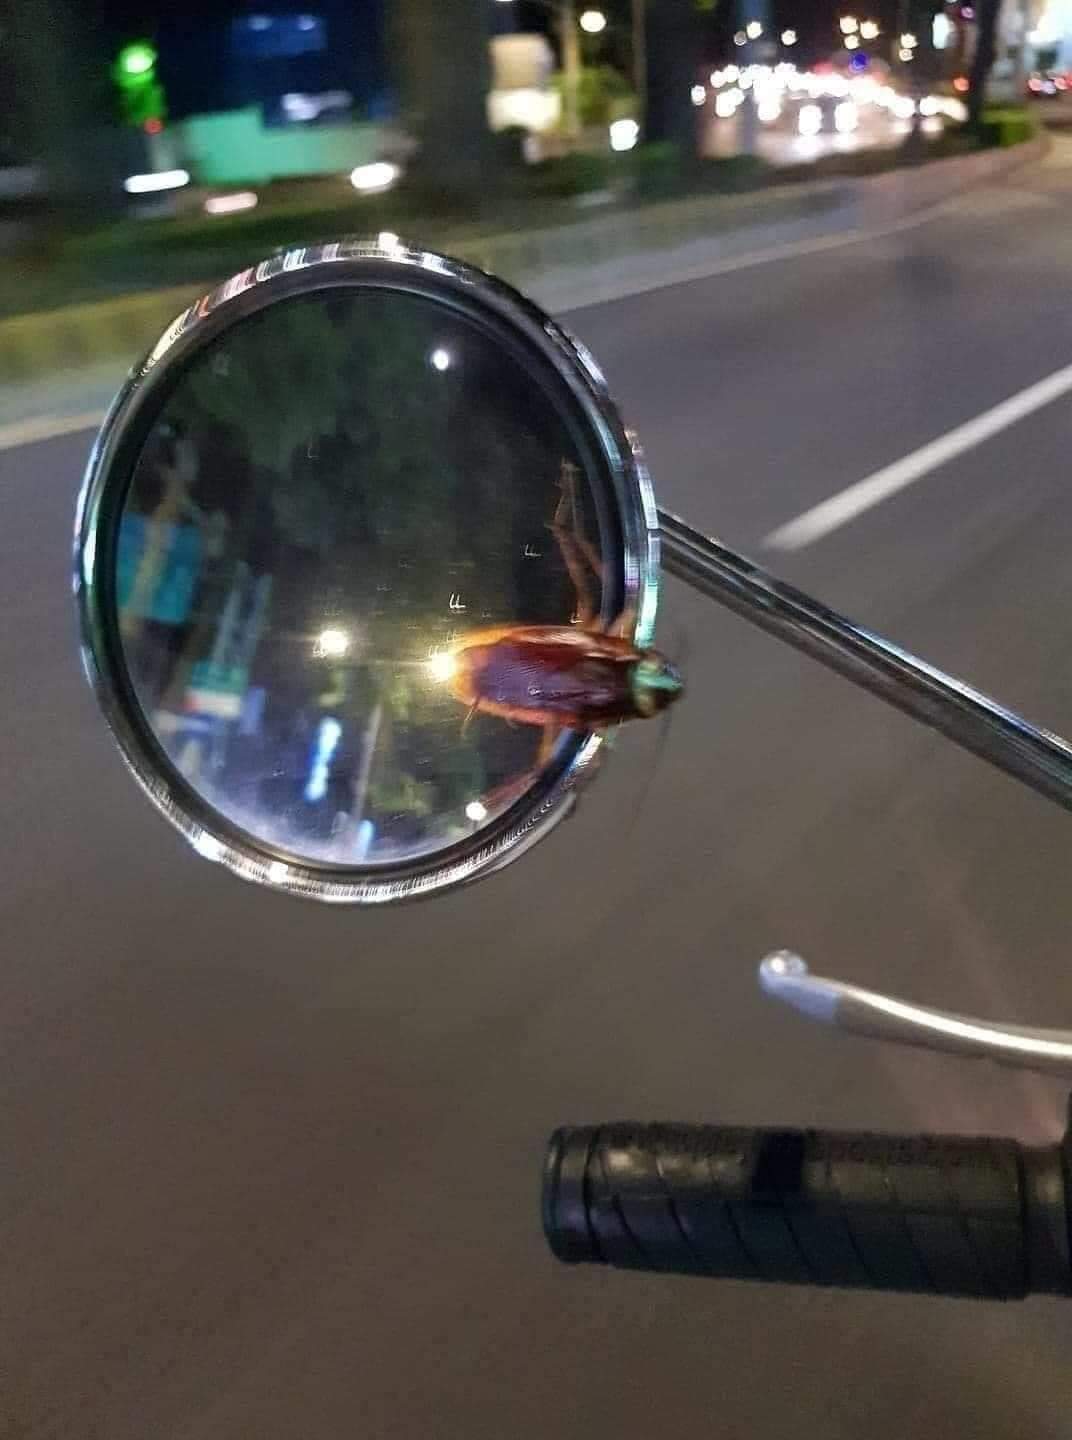 cockroach on motorcycle’s mirror